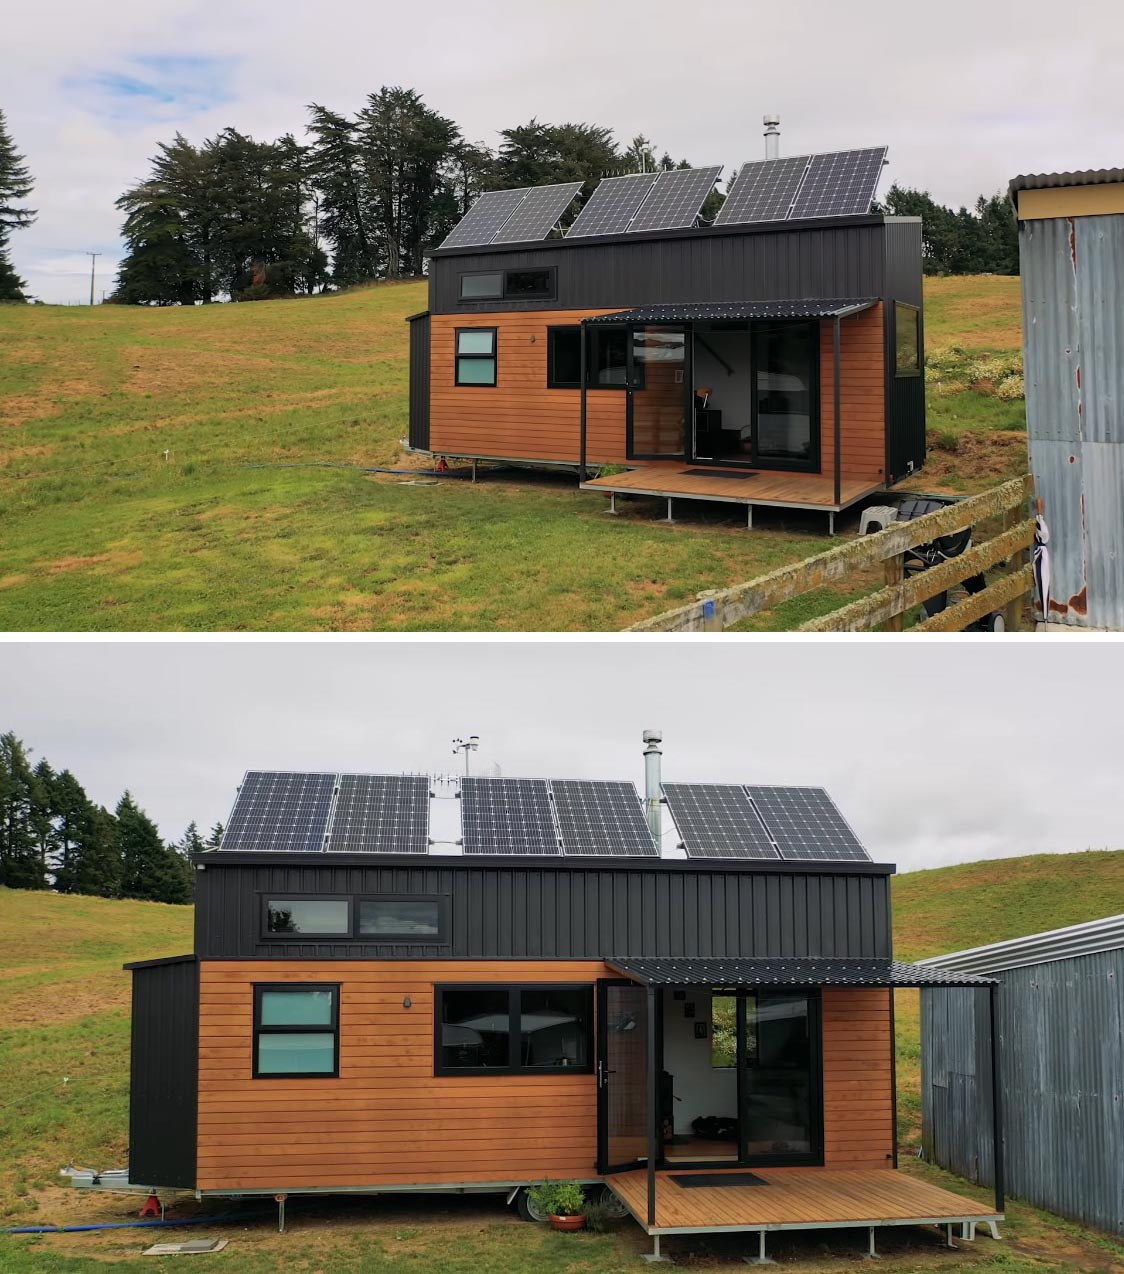 A modern off-the-grid tiny home with solar panels and rainwater collection.